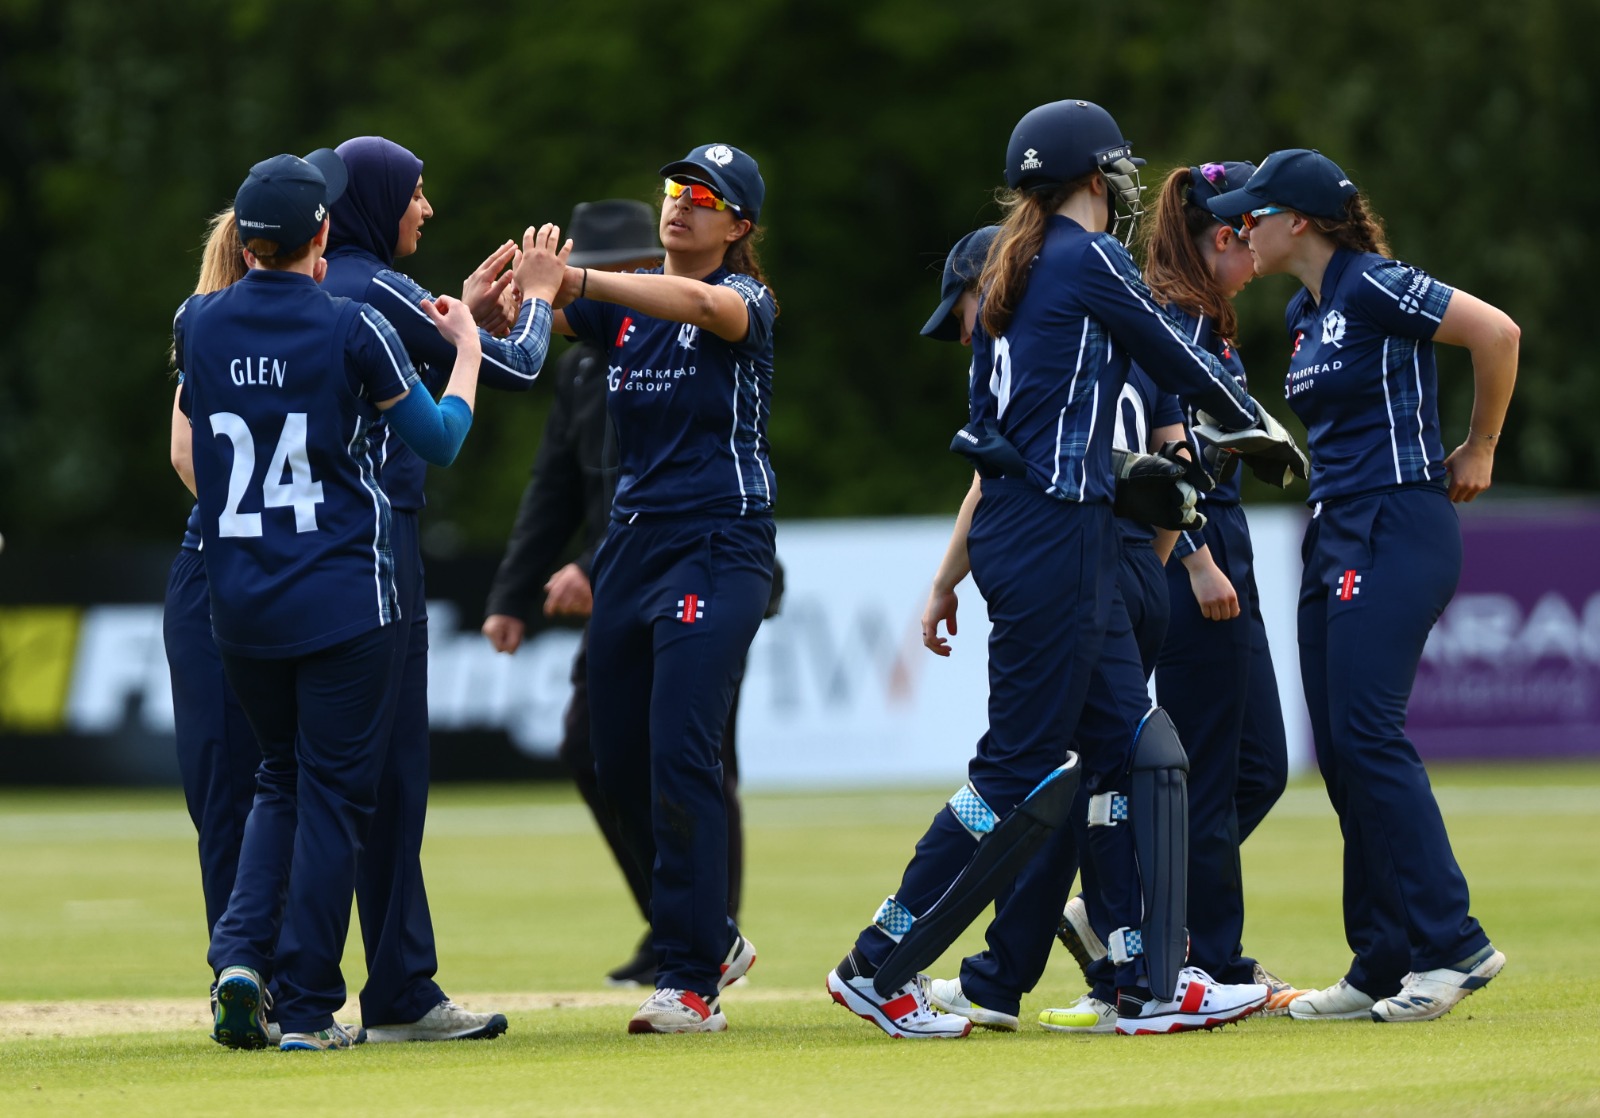 Defeat leaves Scotland women chasing series draw against Ireland